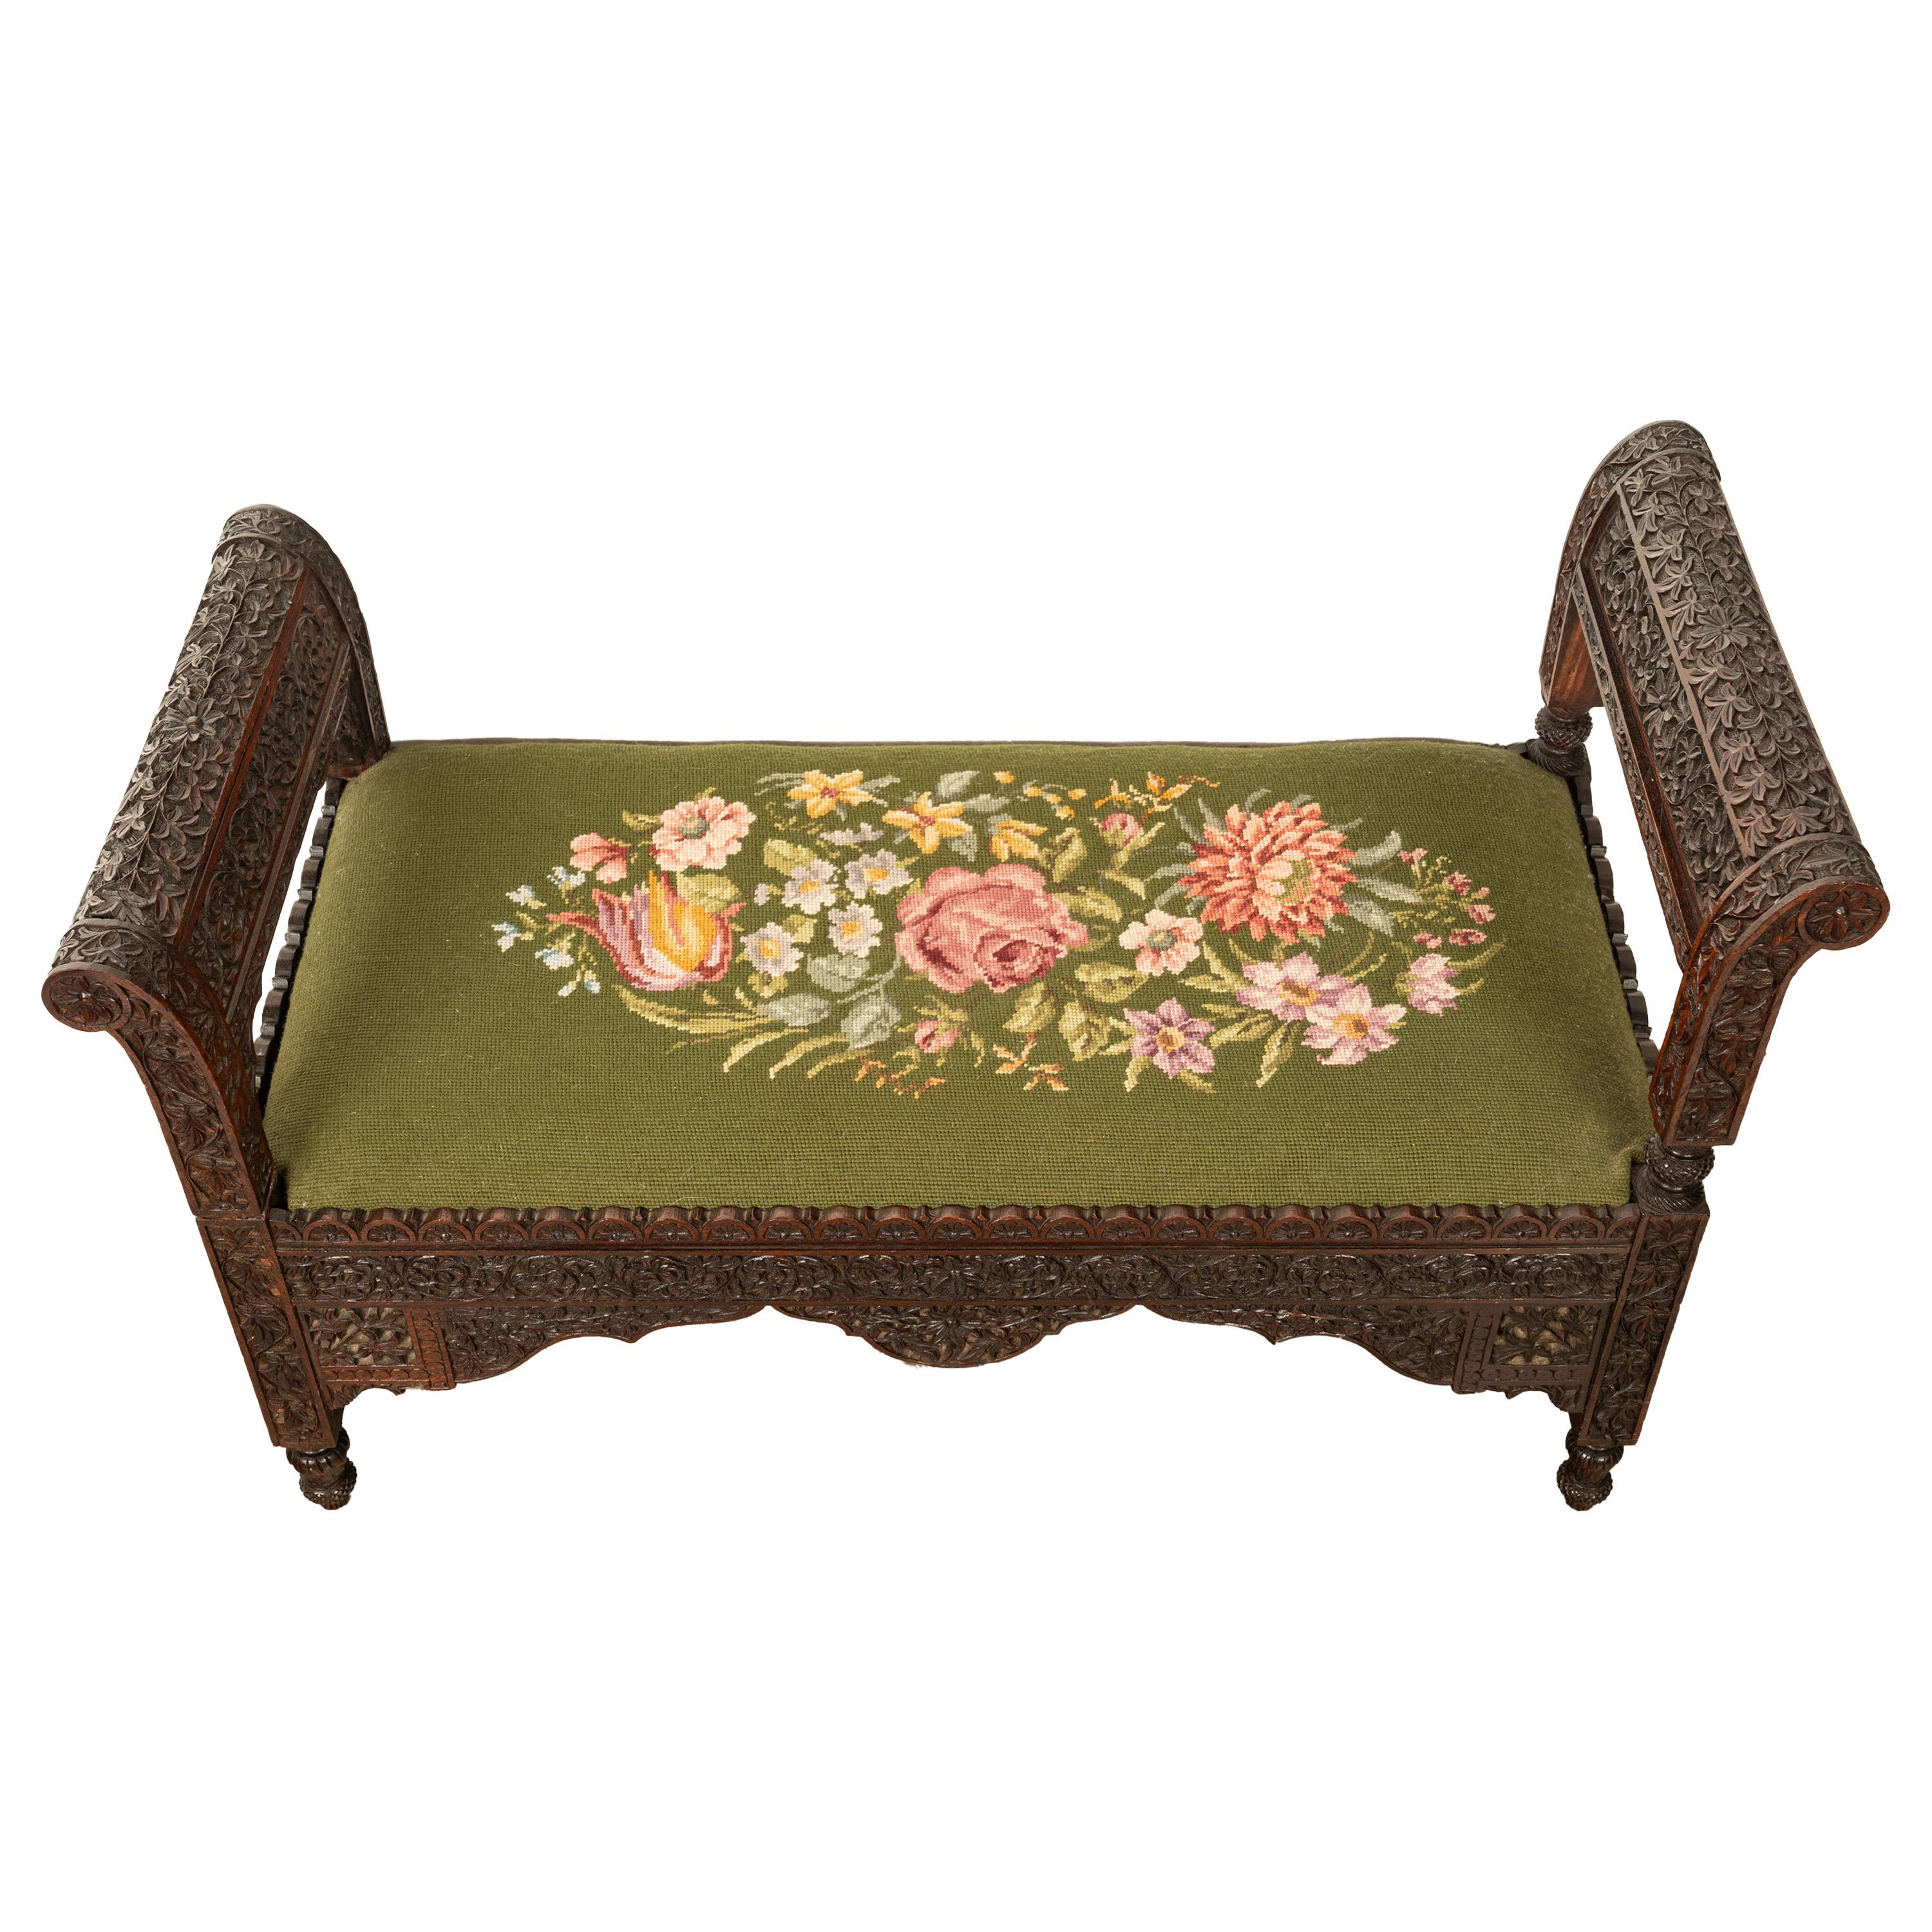 Anglo-Indian Antique Colonial Anglo Indian Carved Rosewood Window Seat Bench Needlepoint 1860 For Sale